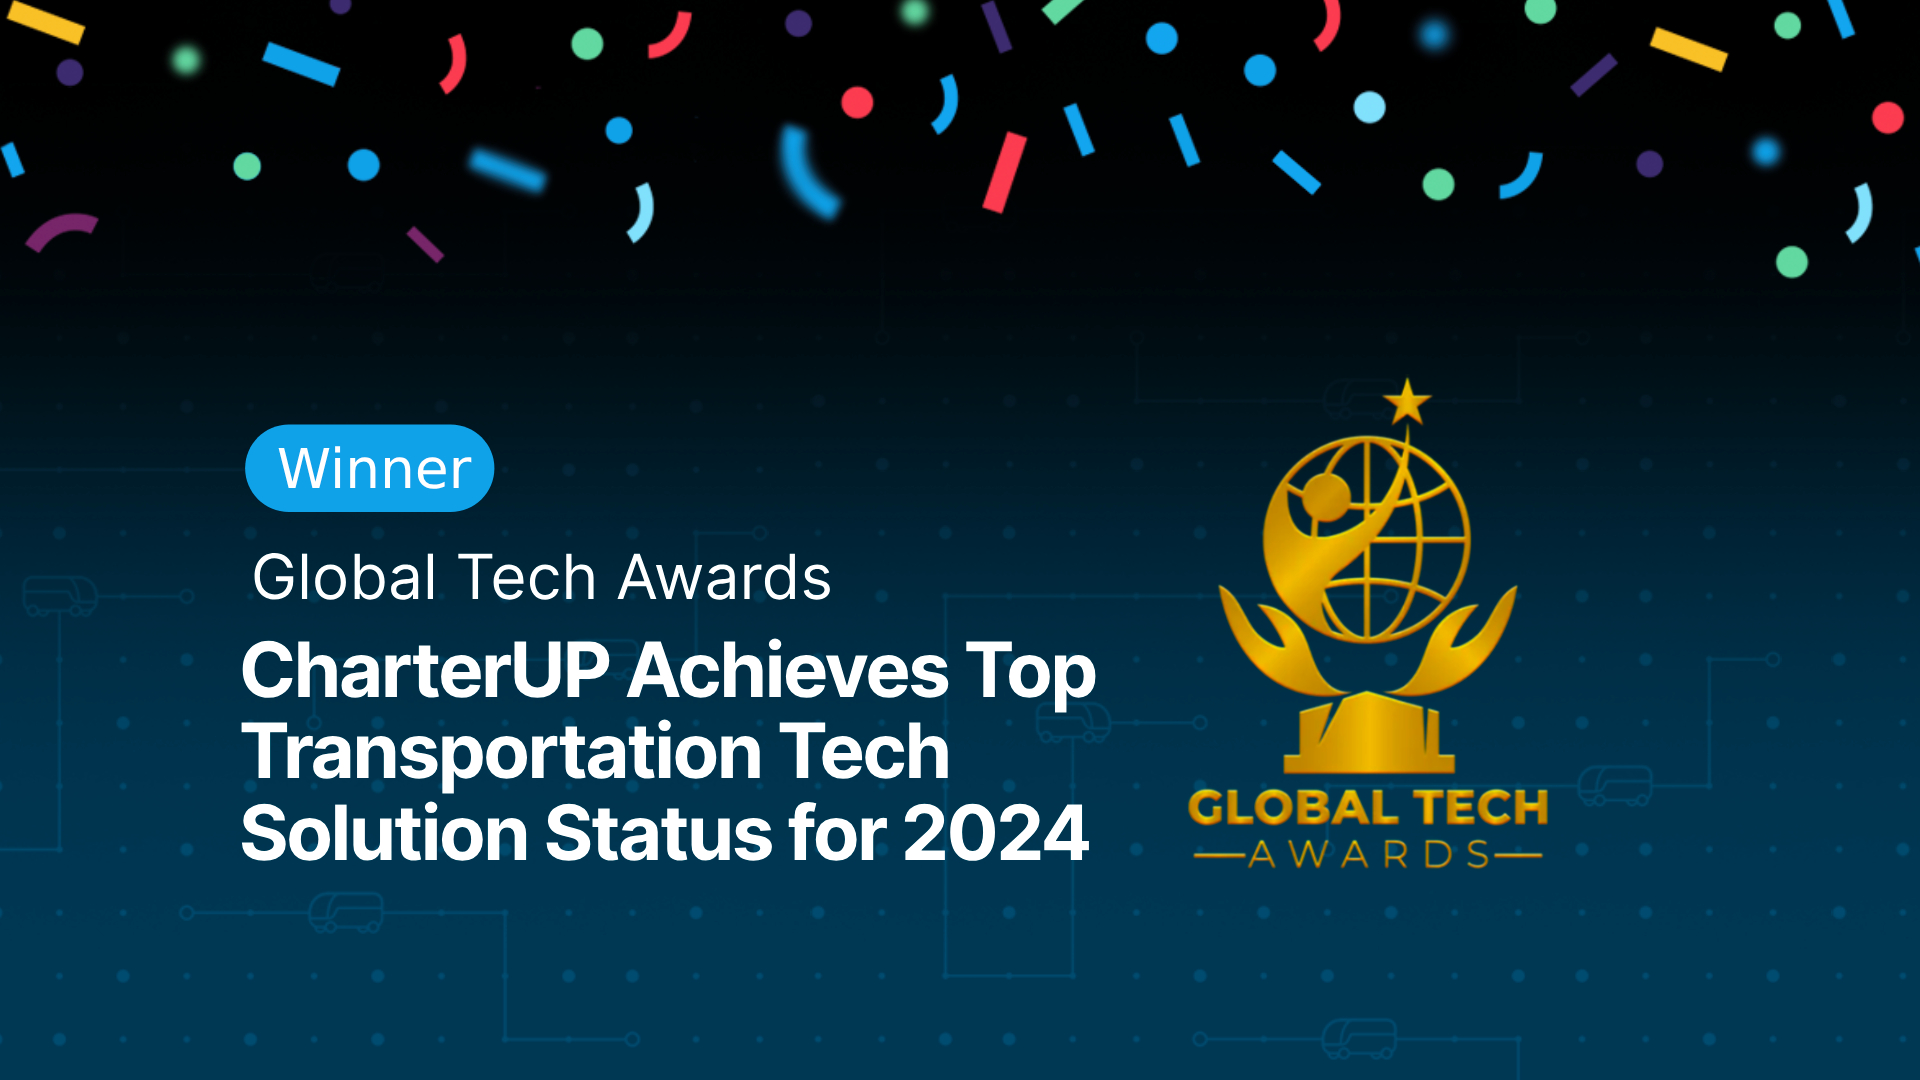 CharterUP named Top Transportation Tech Solution in 2024 Global Tech Awards